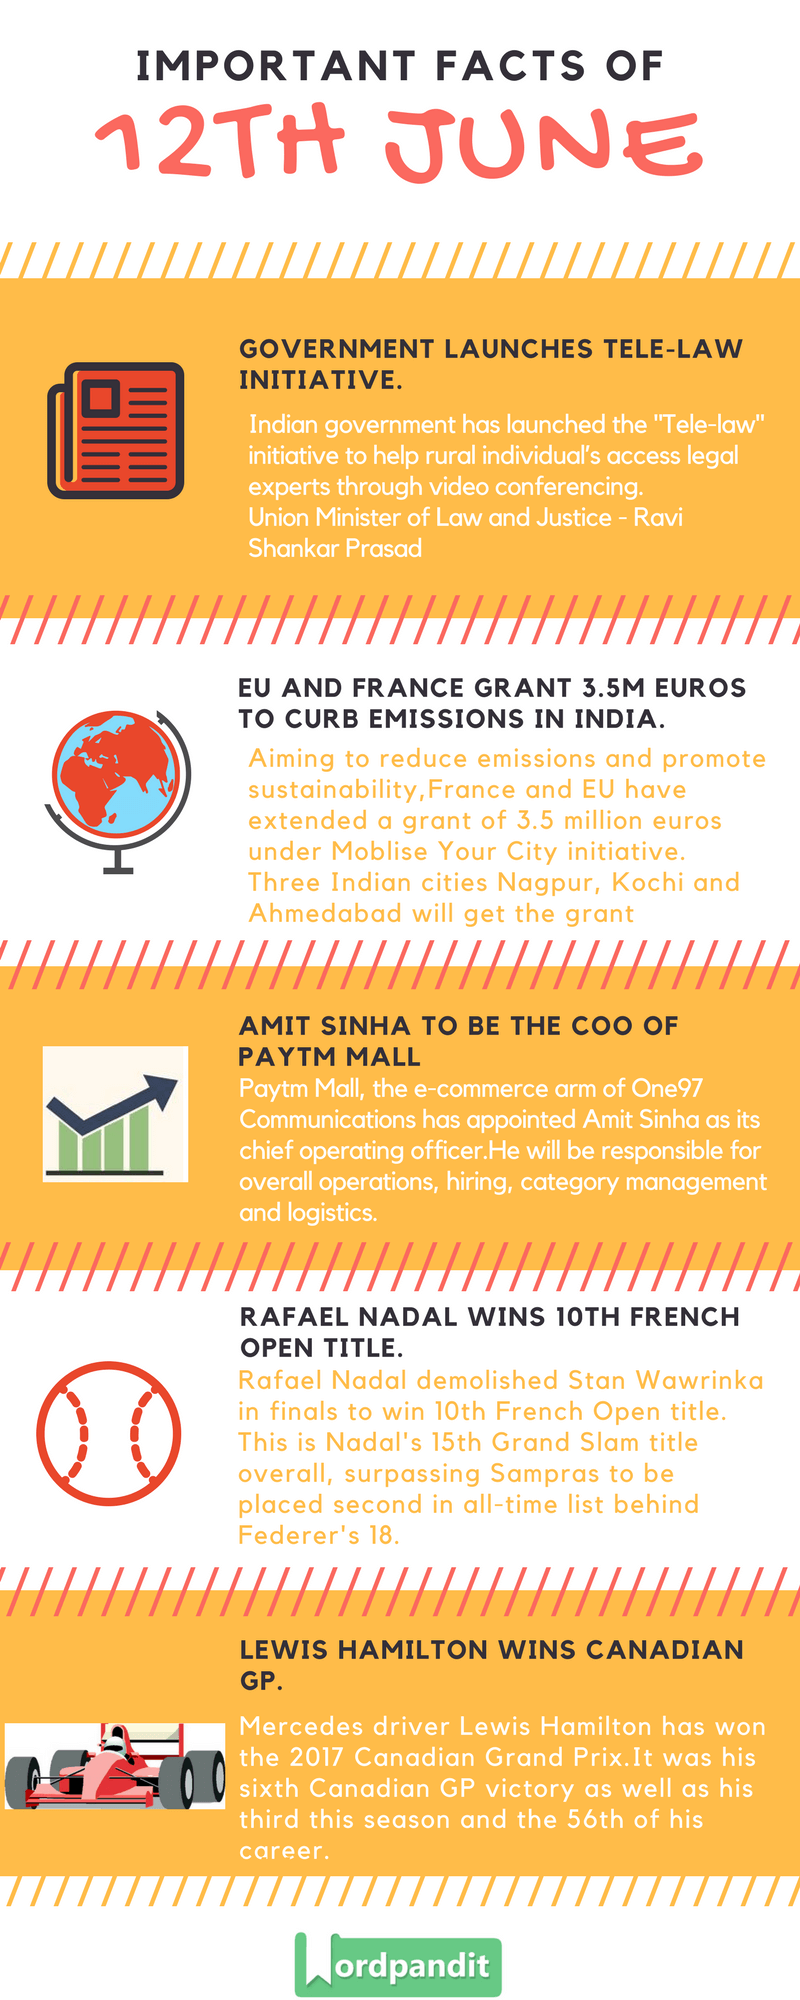 Daily Current Affairs 12 june 2017 and Current Affairs Quiz June 12 2017 |Current Affairs Infographic 12 june 2017